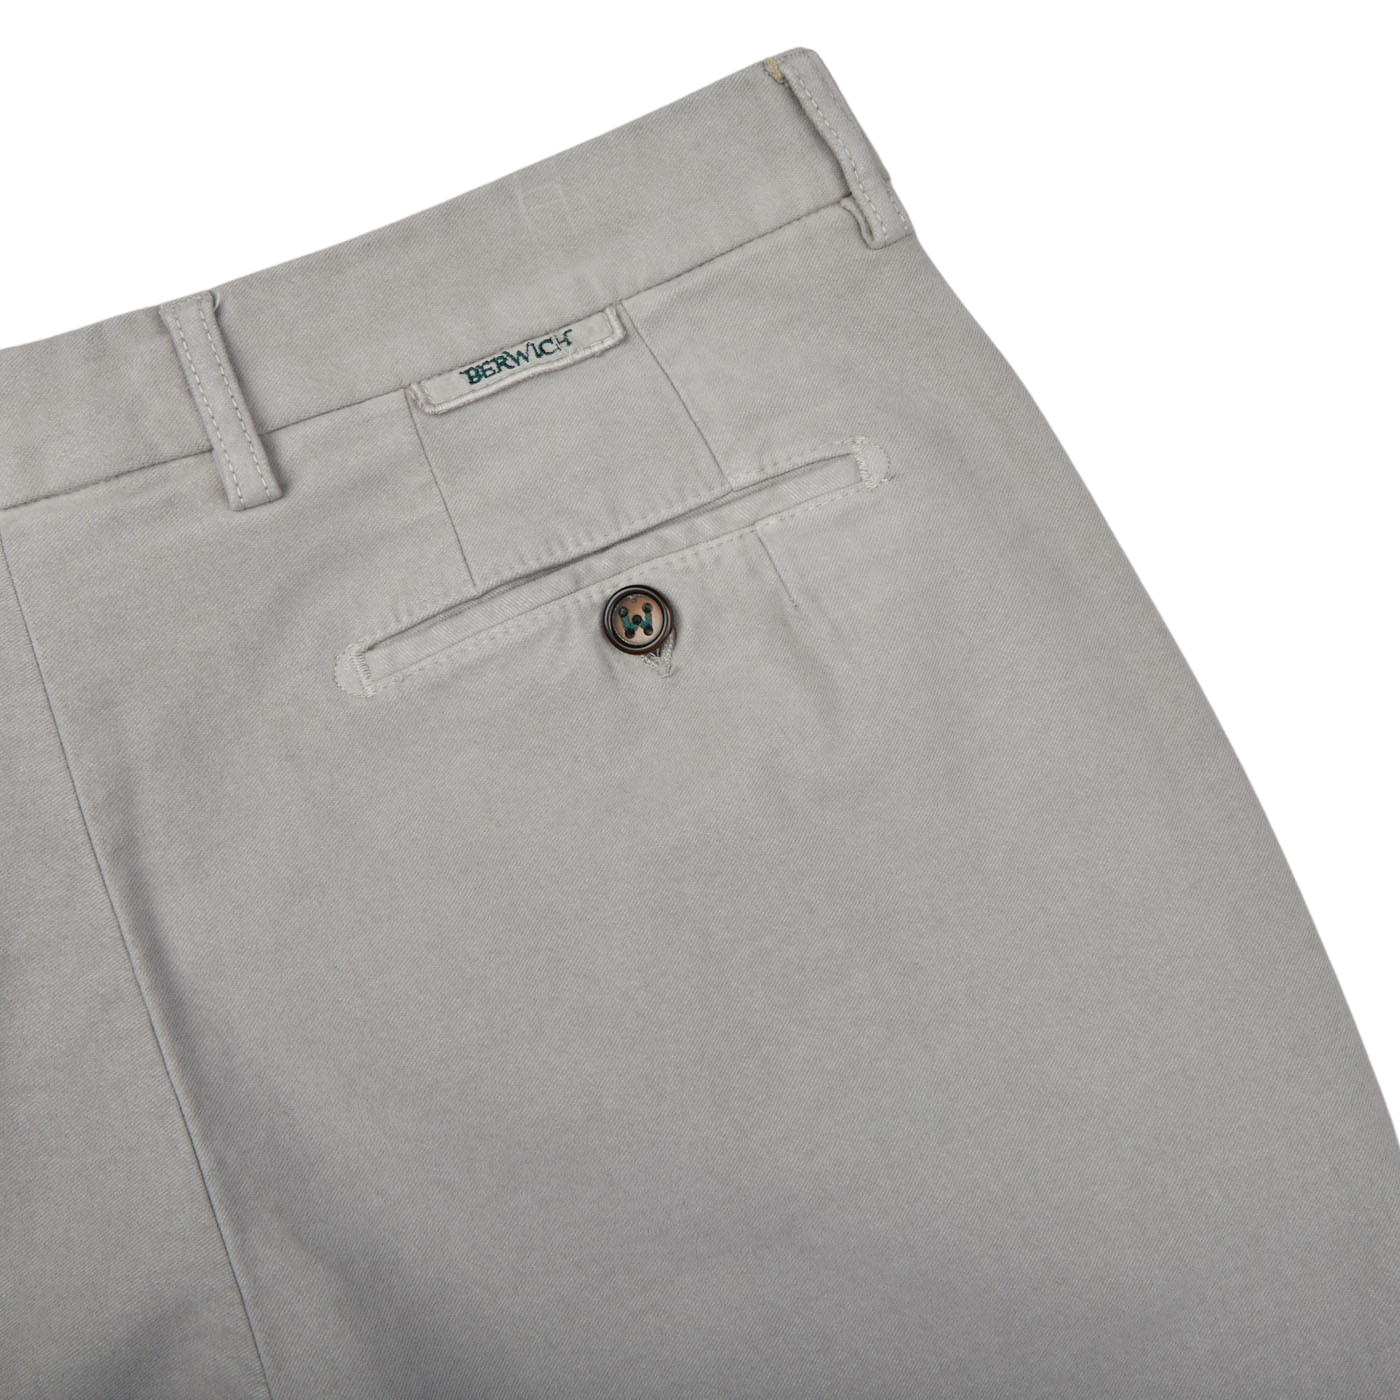 A pair of Light Grey Cotton Moleskin Chinos with a button on the side, in a slim fit, by Berwich.